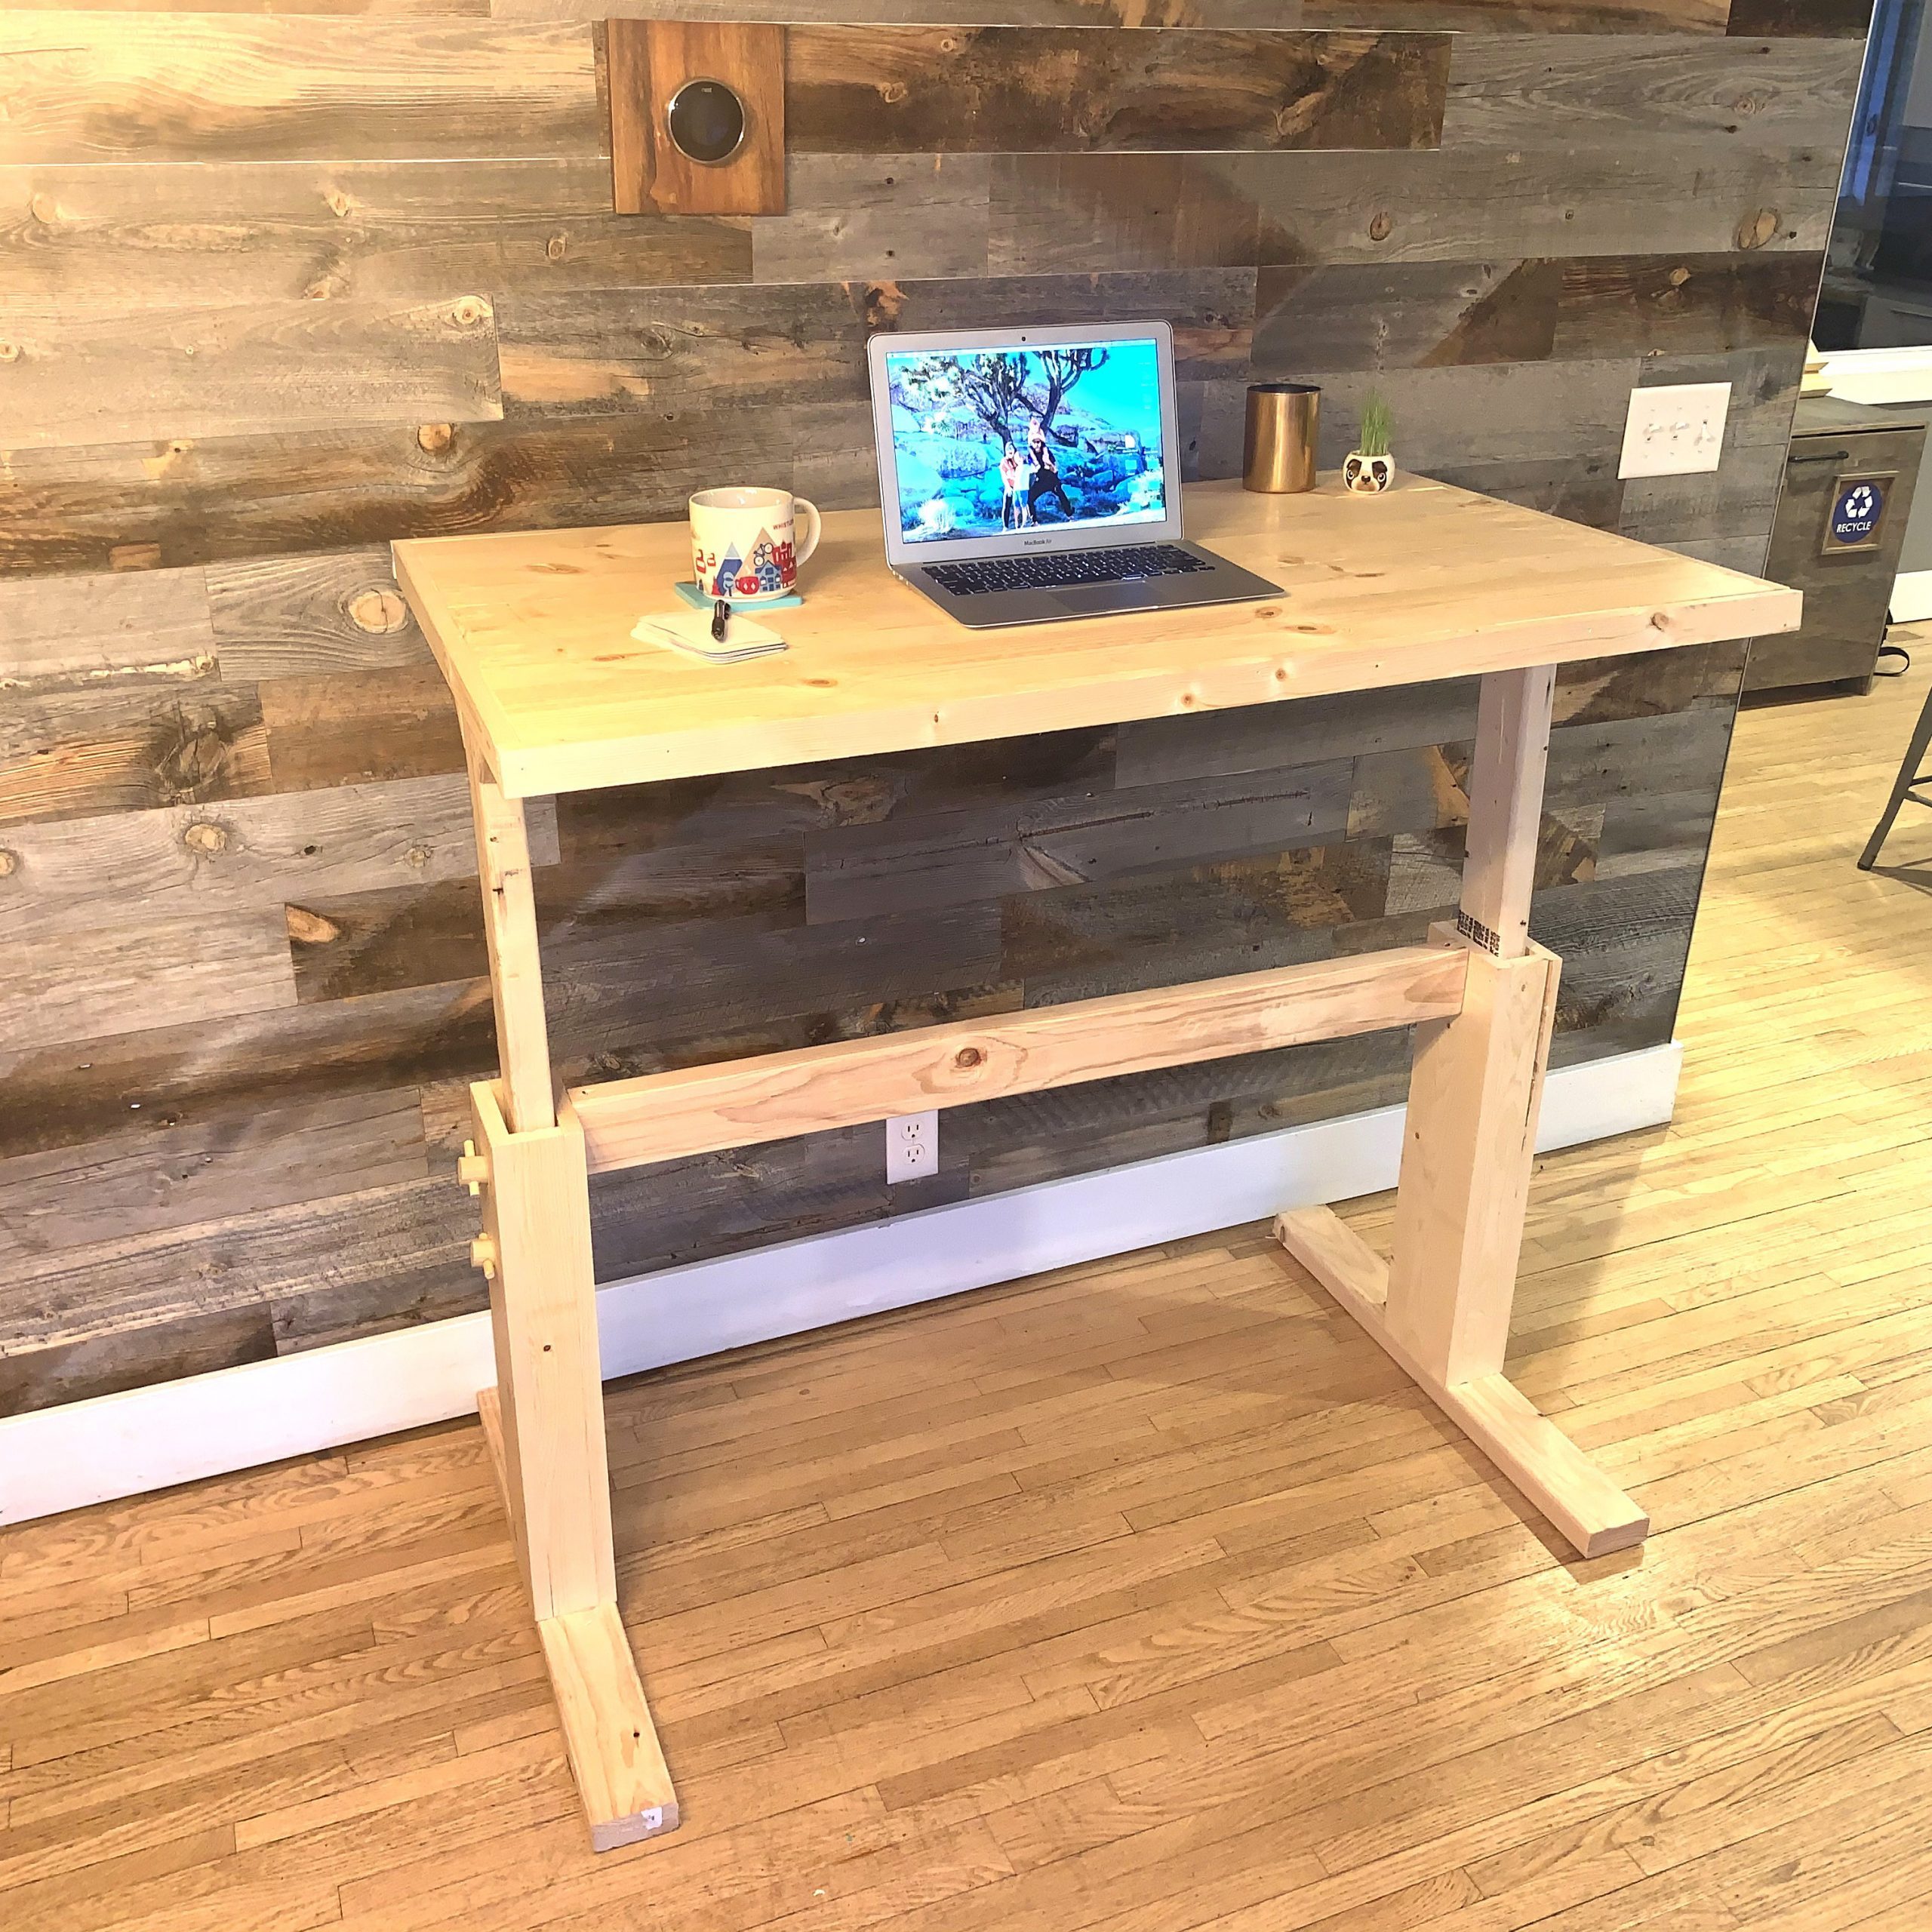 Sit Or Stand How To Make Your Own Adjustable Diy Desk Family Handyman